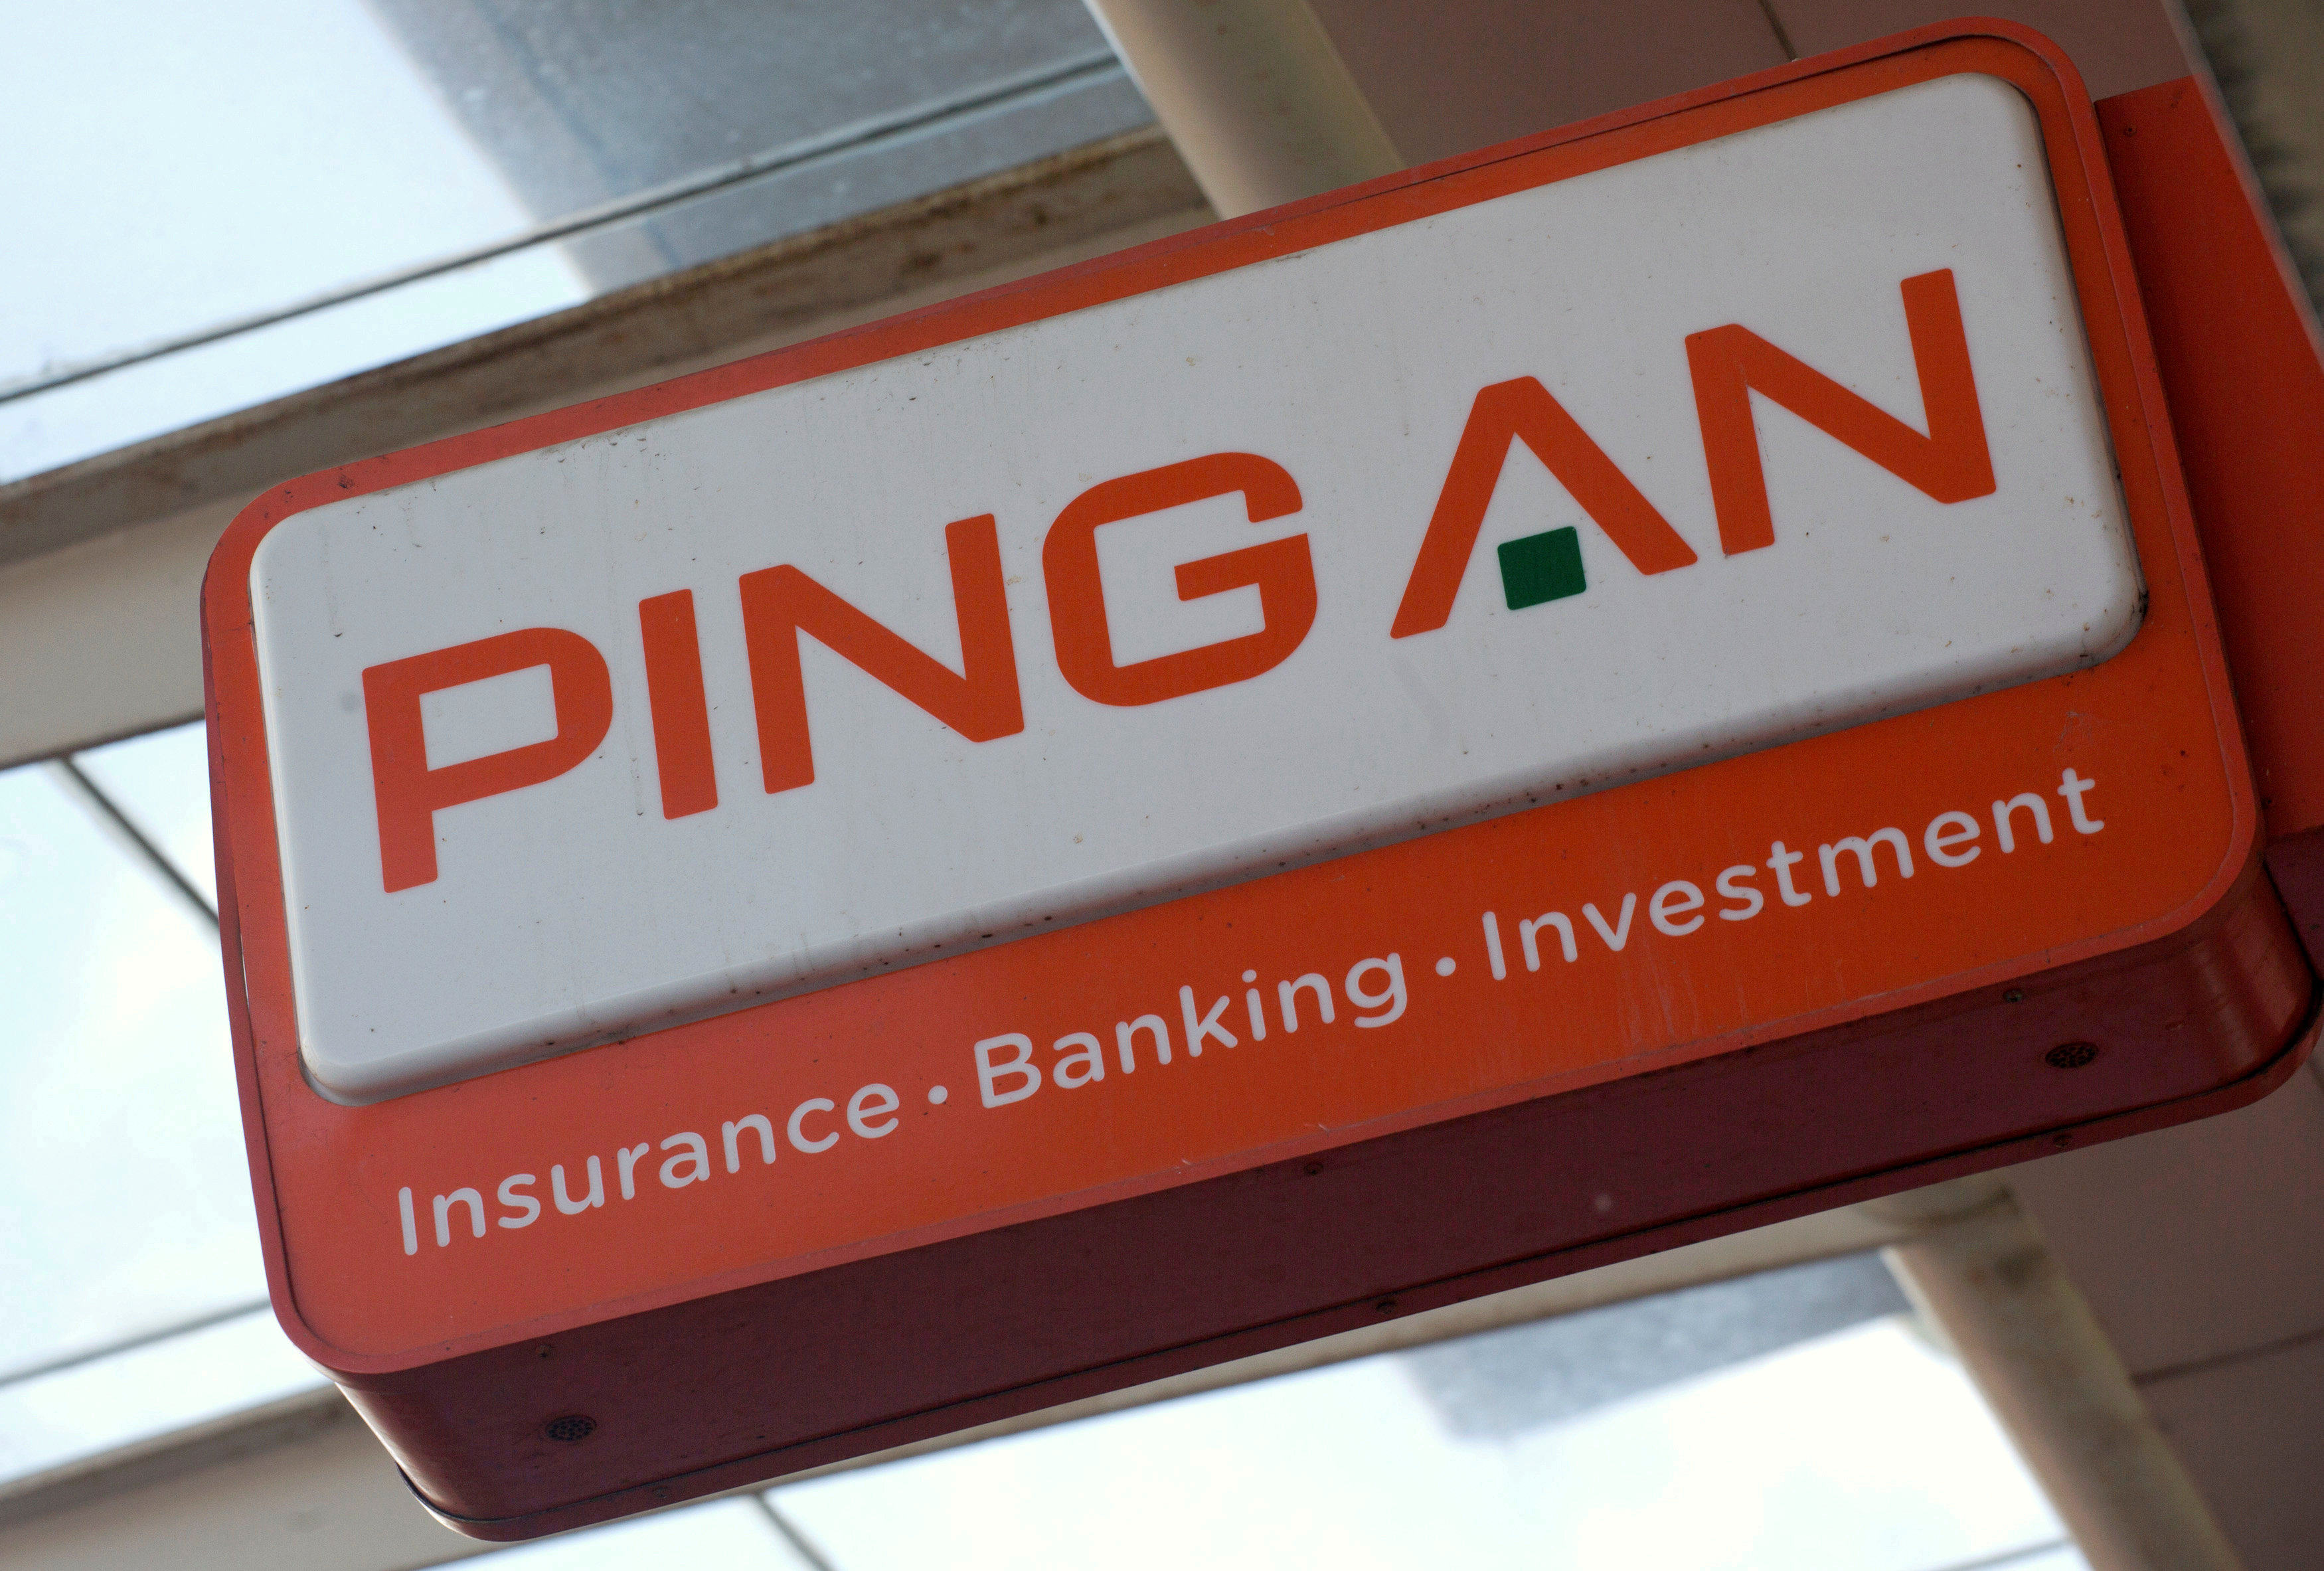 Ping An Insurance is China’s largest insurer by market capitalisation. Photo: Reuters